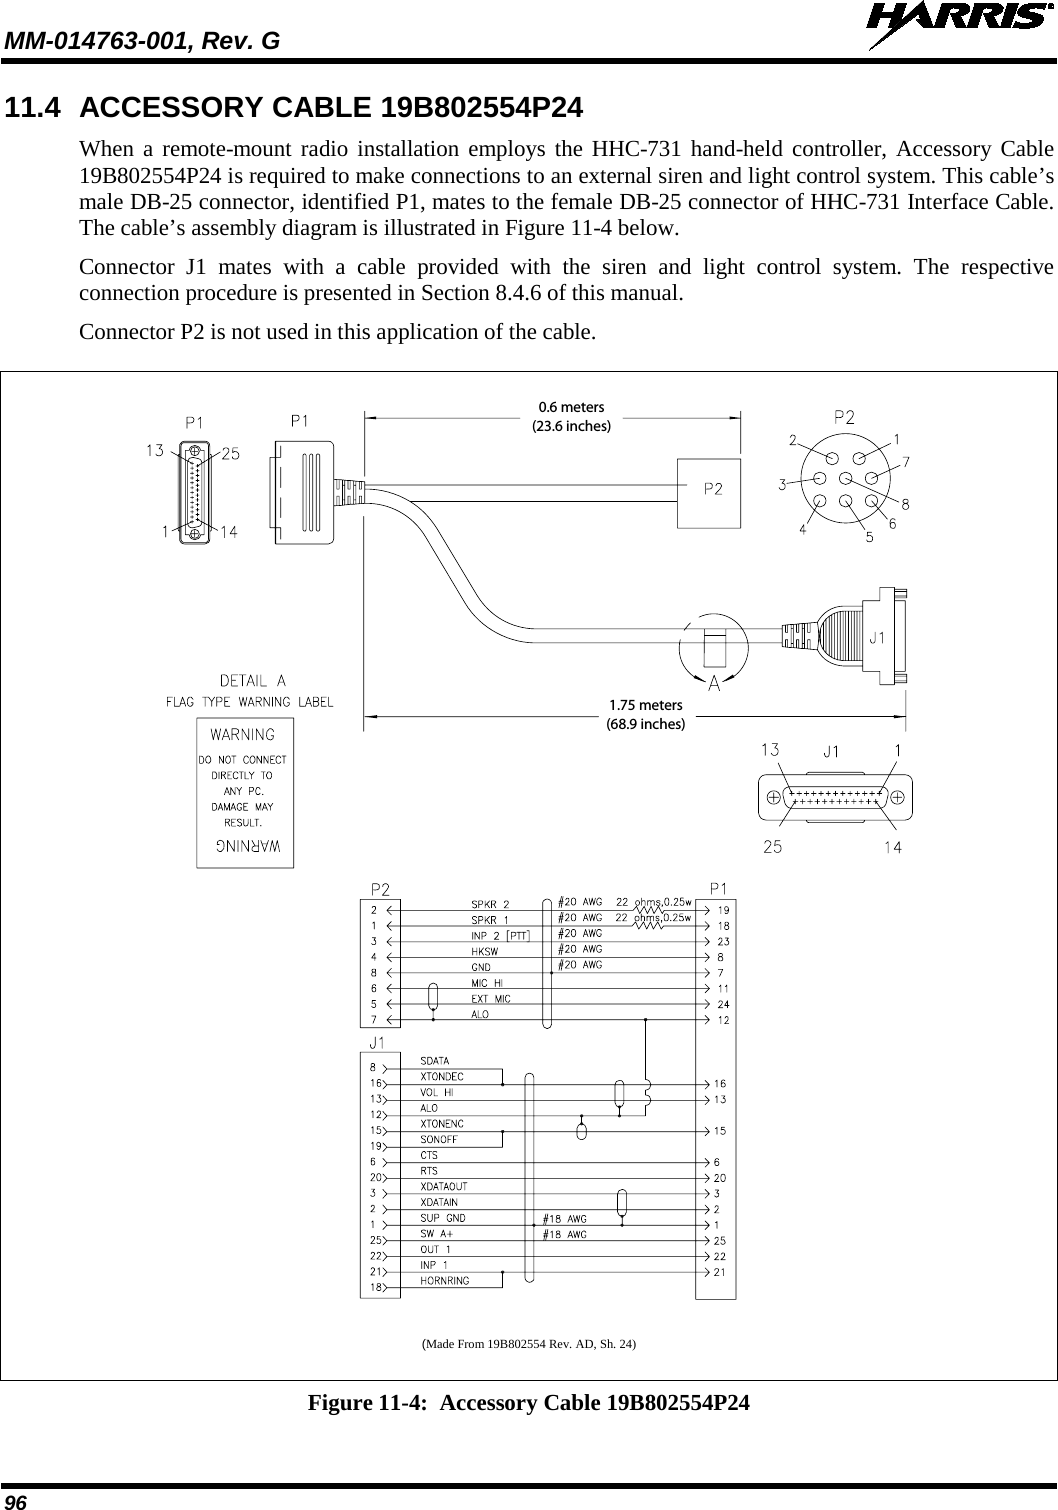 MM-014763-001, Rev. G   96 11.4 ACCESSORY CABLE 19B802554P24 When a remote-mount radio installation employs the HHC-731 hand-held controller, Accessory Cable 19B802554P24 is required to make connections to an external siren and light control system. This cable’s male DB-25 connector, identified P1, mates to the female DB-25 connector of HHC-731 Interface Cable. The cable’s assembly diagram is illustrated in Figure 11-4 below. Connector J1 mates with a cable provided with the siren and light control system. The respective connection procedure is presented in Section 8.4.6 of this manual. Connector P2 is not used in this application of the cable.    (Made From 19B802554 Rev. AD, Sh. 24)  Figure 11-4:  Accessory Cable 19B802554P24  0.6 meters(23.6 inches)1.75 meters(68.9 inches)